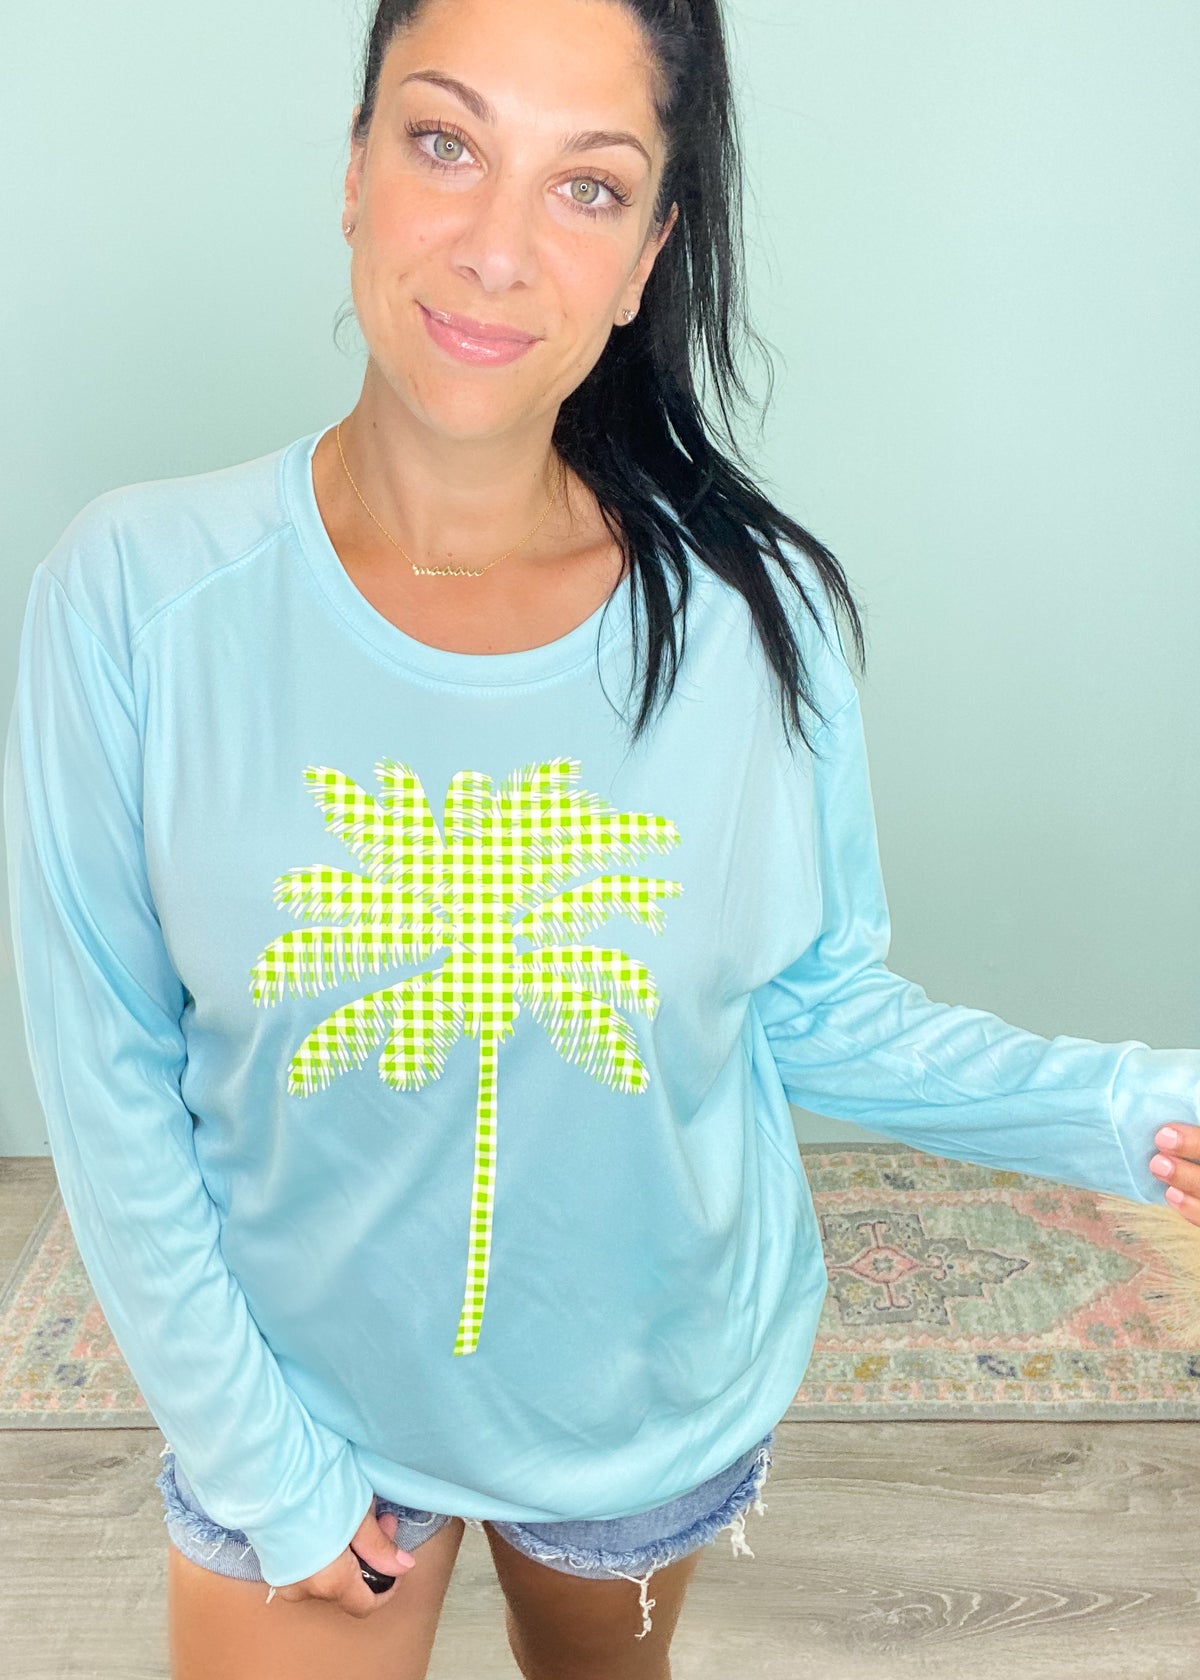 Aqua 'Gingham Palm Tree' UPF 50+ Swim & Sun Long Sleeve Top-Made with UPF 50+(Ultraviolet Protection Factor), this top is designed to protect 98% of the sun's rays. UPF measures both UVB and UVA rays( while SPF measures only UVB). Not to mention the adorable gingham printed palm tree & gorgeous aqua or coral colors to choose from! Yass Beach!-Cali Moon Boutique, Plainville Connecticut